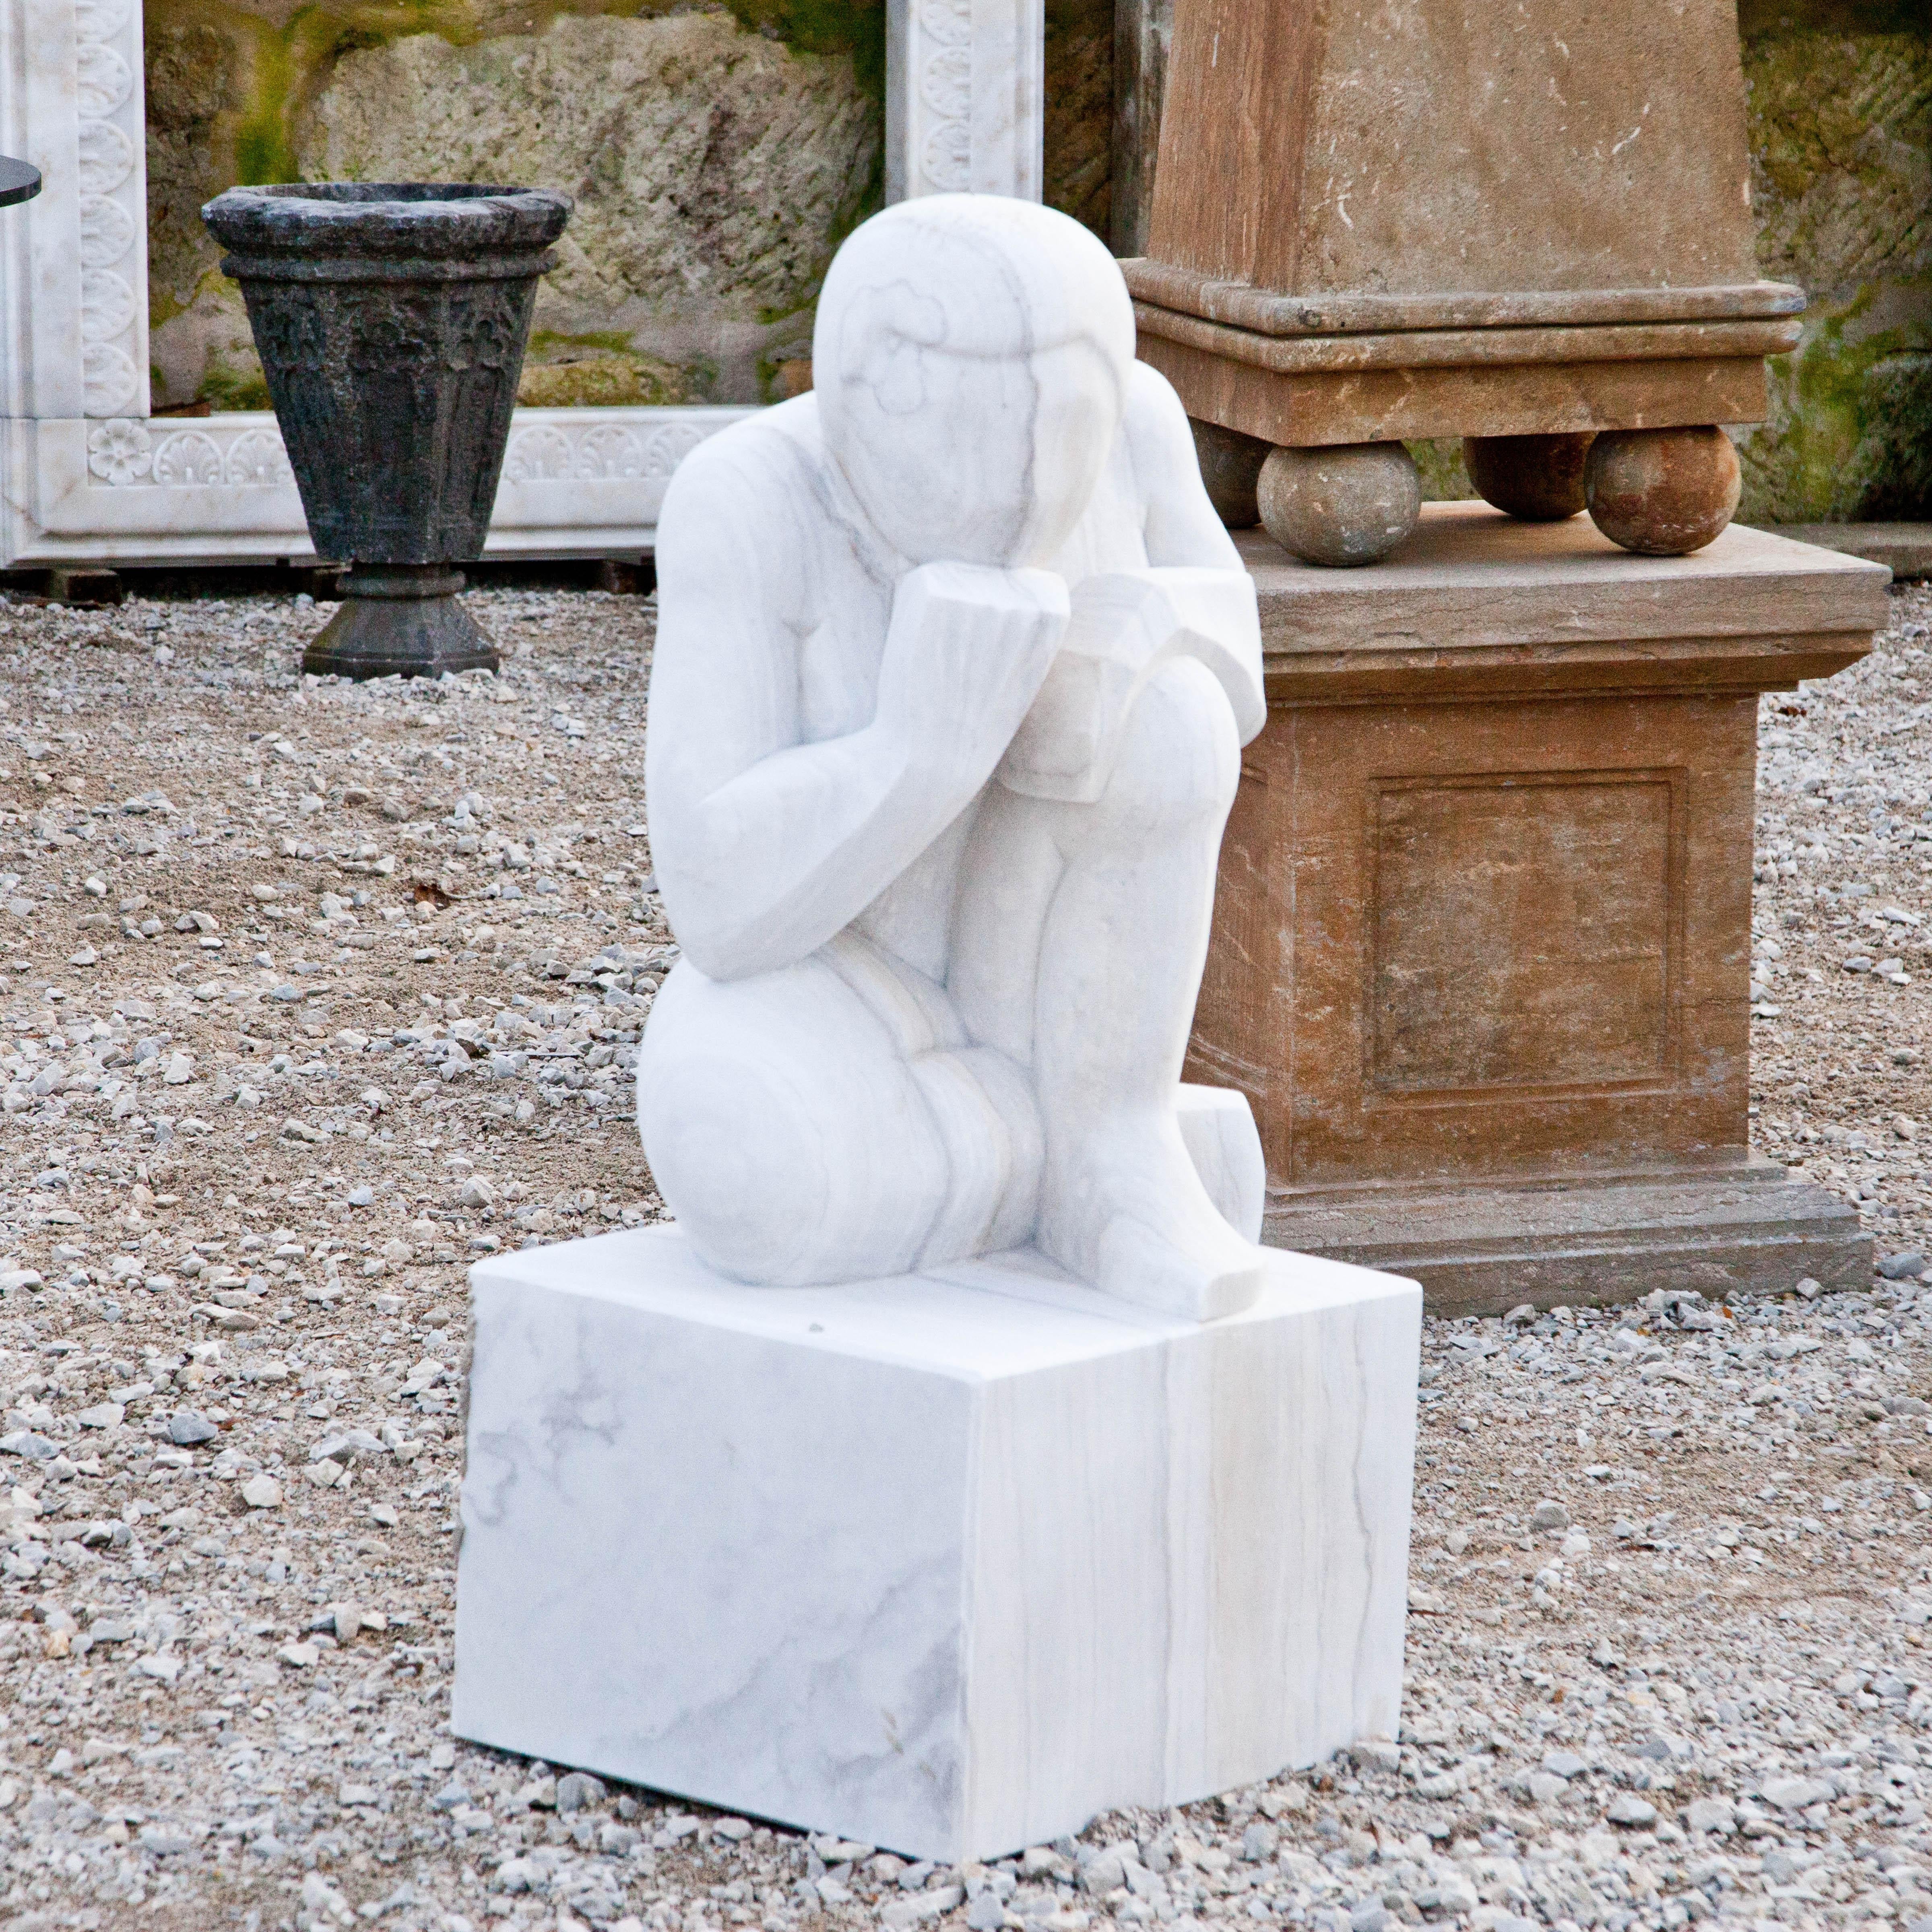 An abstract figure of a thinker squatting on a square pedestal, his chin resting on his fist. The sculpture is handcrafted from marble and has a fine surface structure.